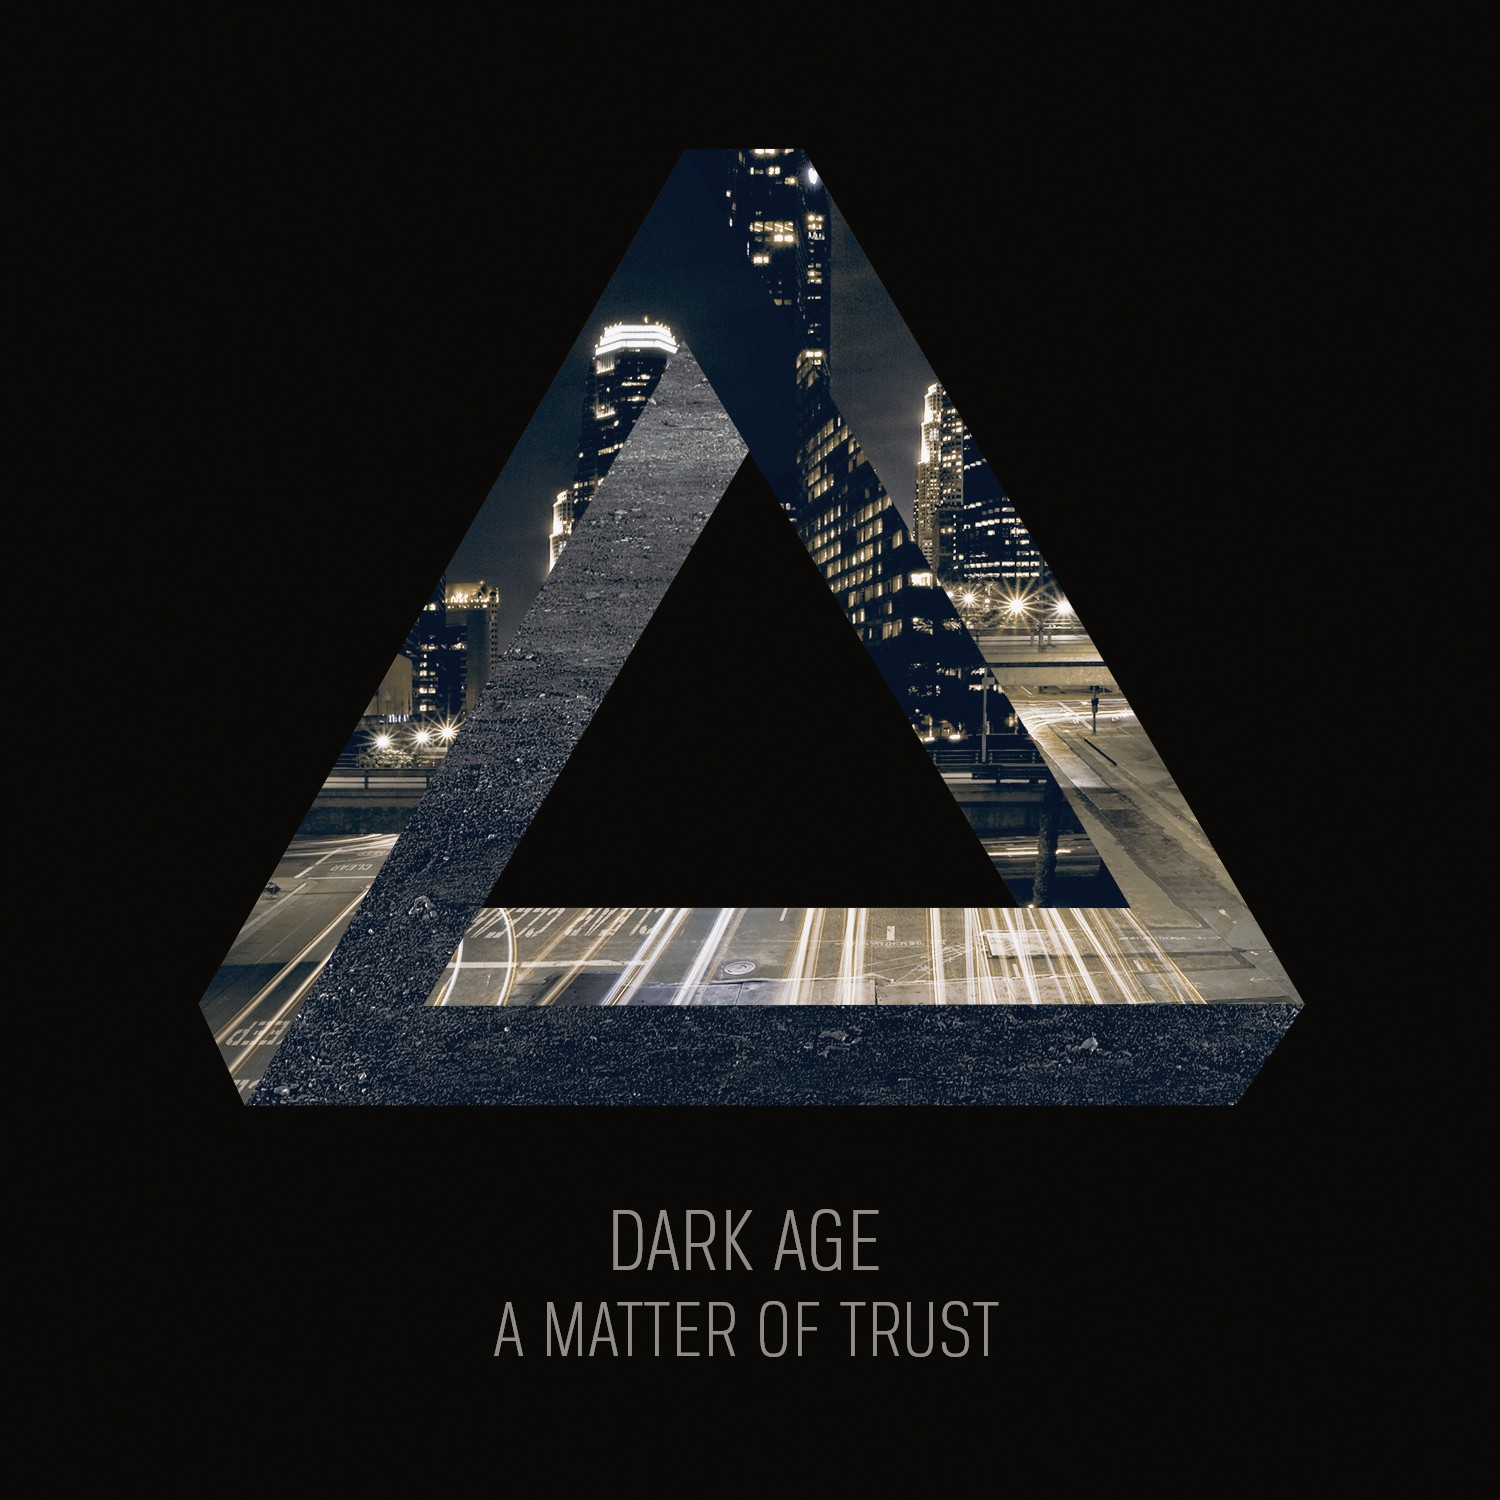 News Added Oct 06, 2013 Dark Age is a German Rock/Metal band from Hamburg, Germany formed in 1995 by Eike Freese (guitar, vocals), André Schumann (drums) and Oliver Fliegel (bass guitar). Submitted By getmetal Track list: Added Oct 06, 2013 CD1: 01. Nero 3:35 02. Afterlife 3:08 03. Out Of Time 3:45 04. Fight 3:30 […]